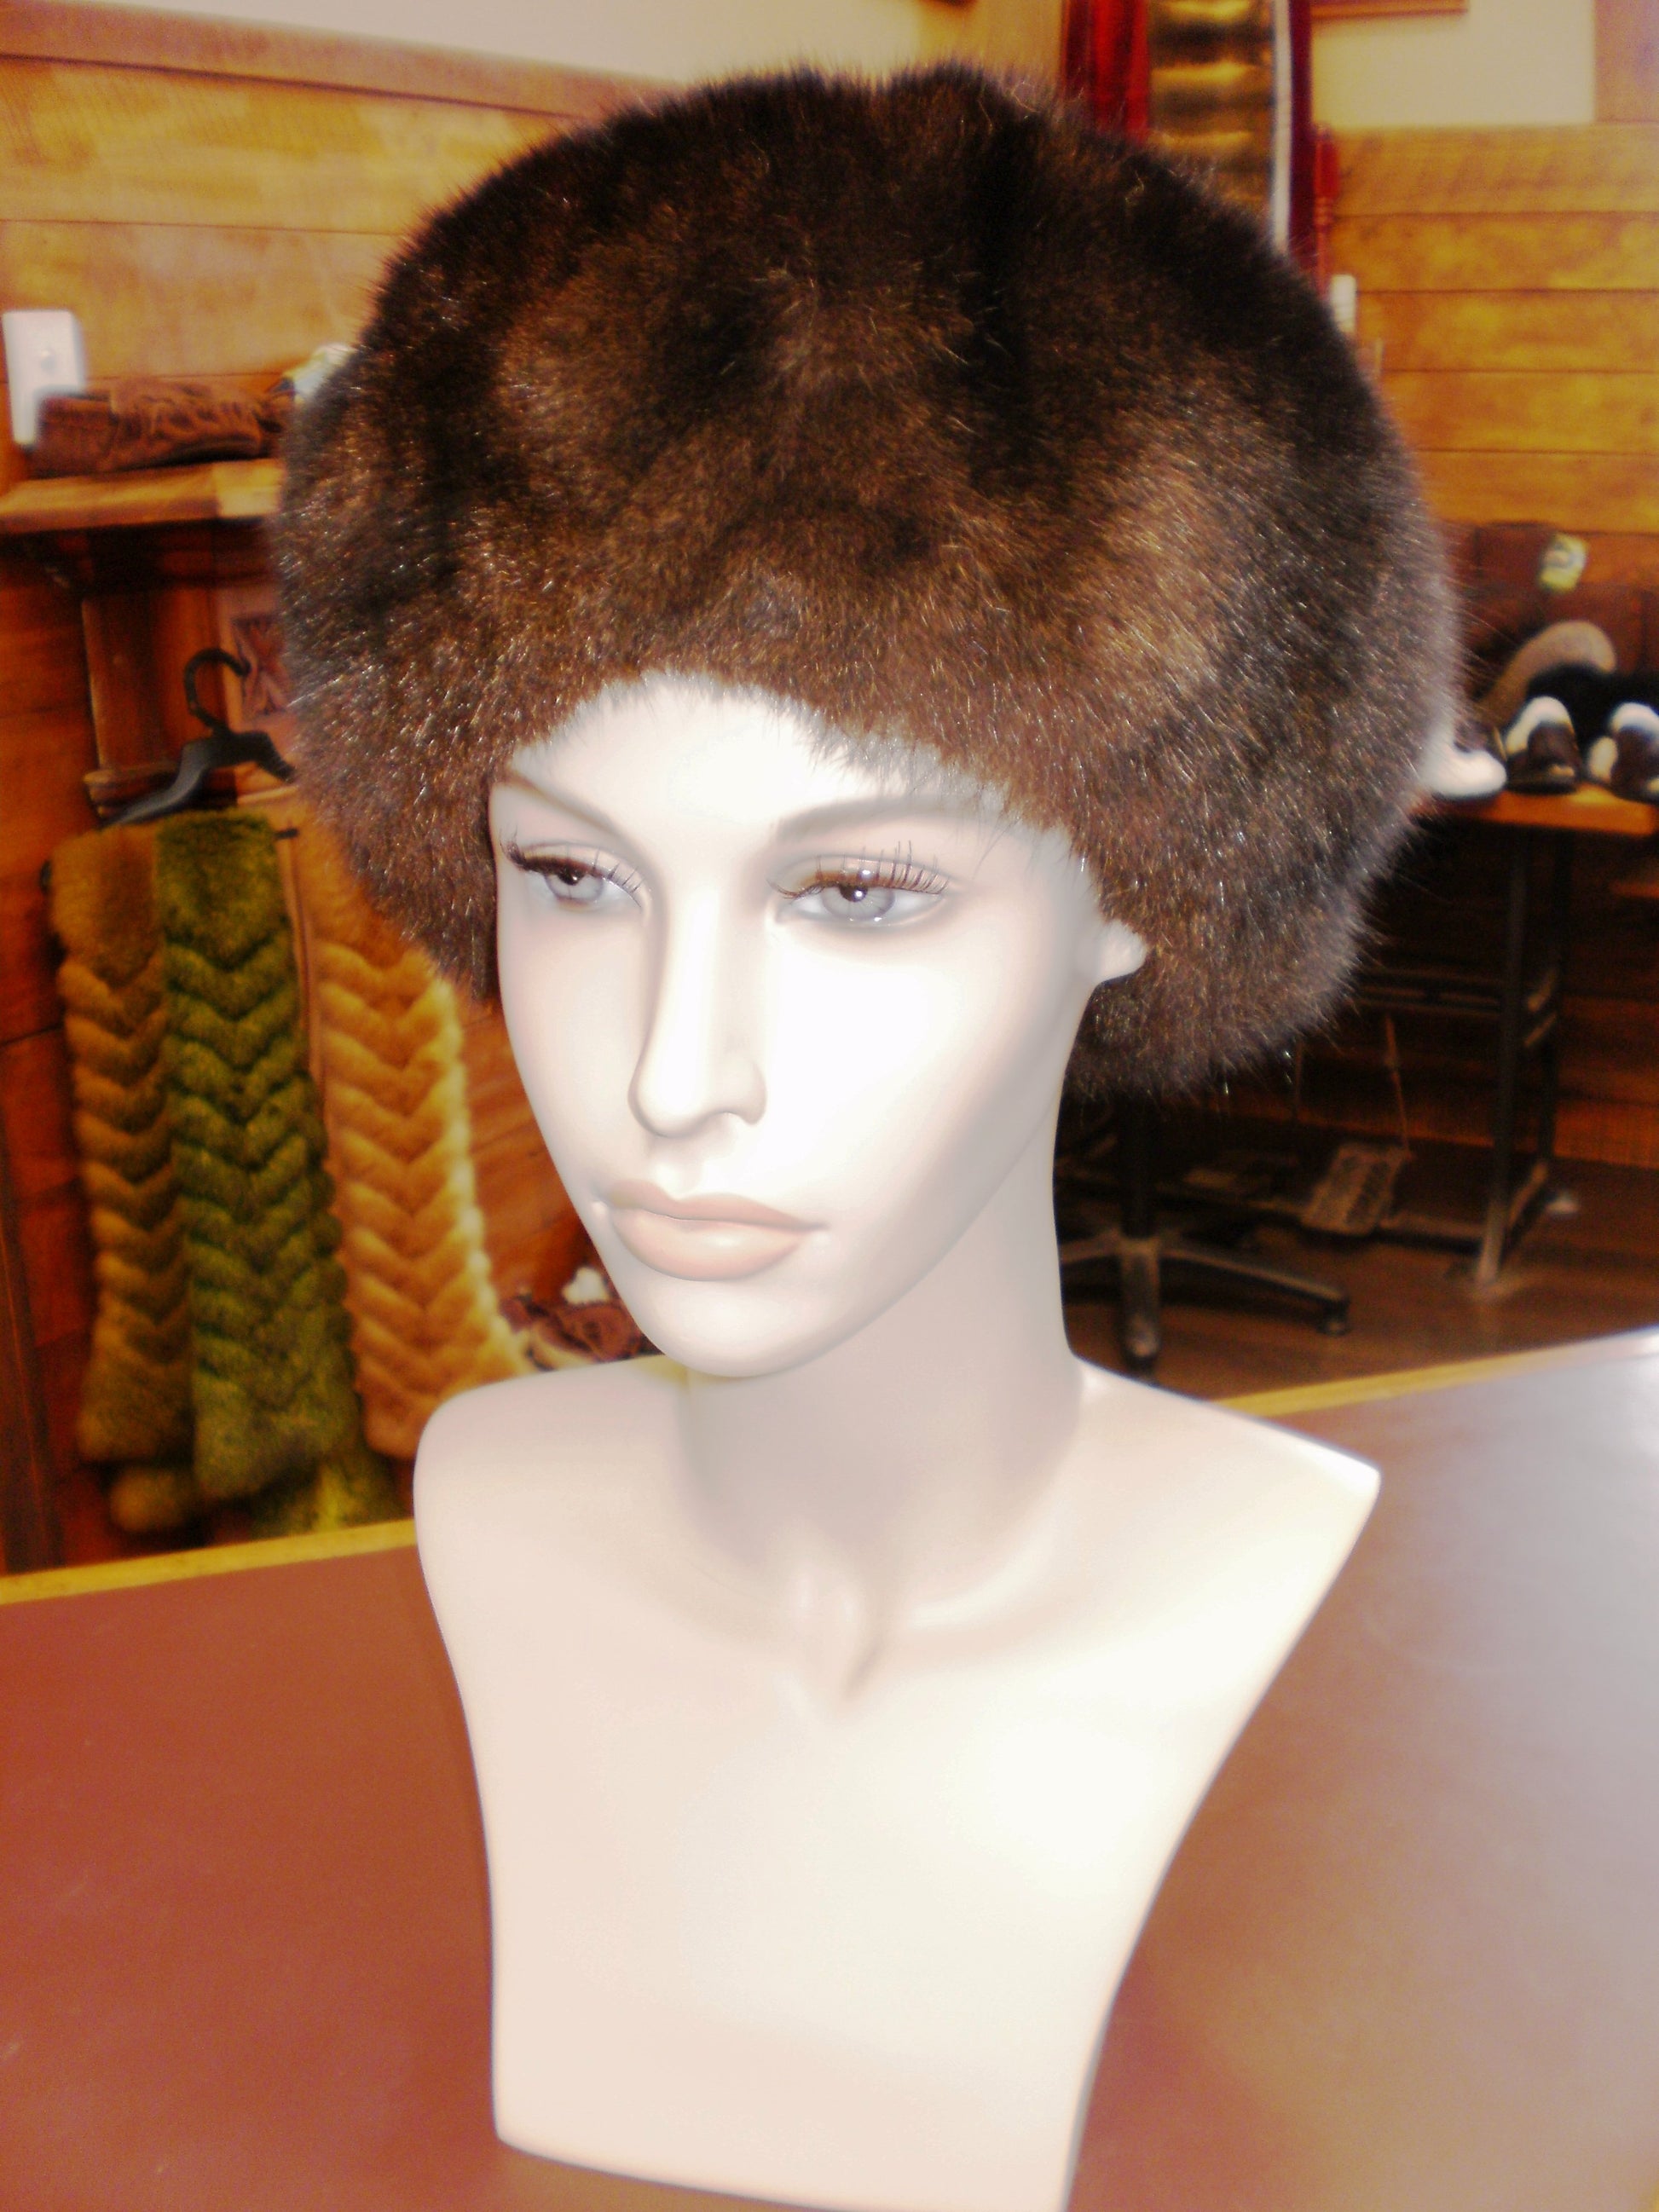 COSSACK HAT - Woolshed Gallery